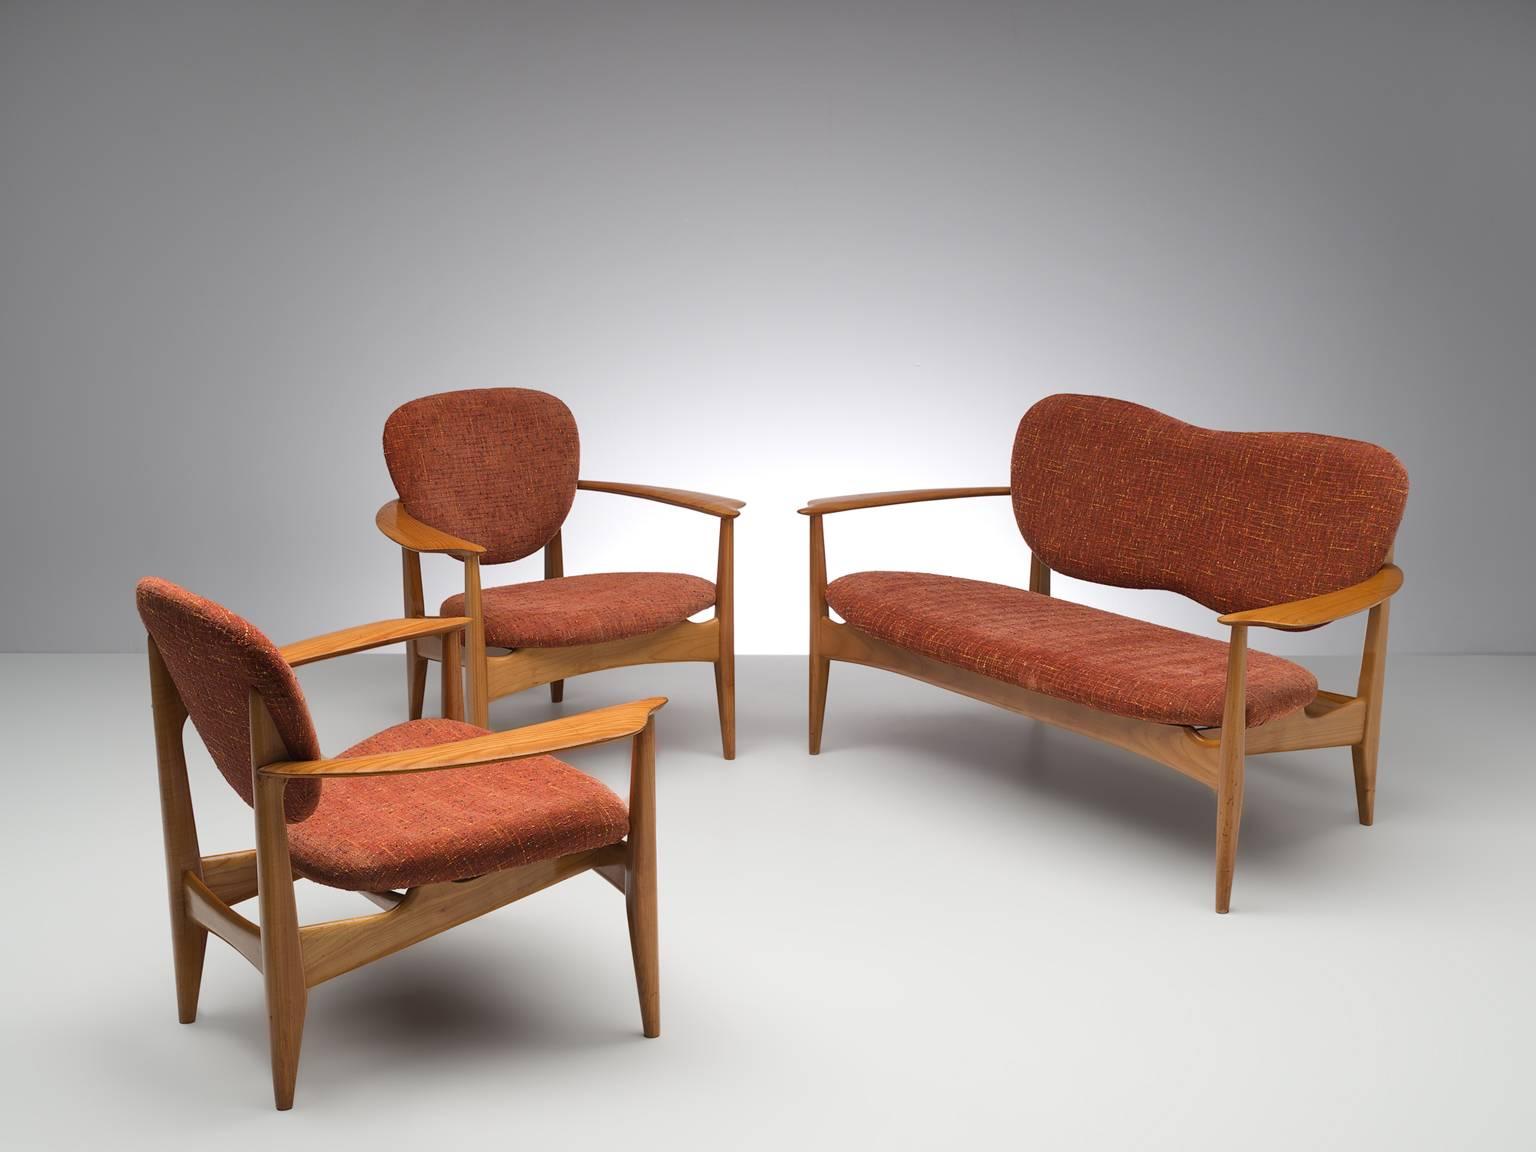 Living room set, red to orange fabric, oak, Denmark, 1950s.

Wonderful delicate set consisting of two chairs and one sofa. These elegant, curved armchairs and sofa feature waved, butterfly backs and four tapered wooden legs. The chairs and sofa are